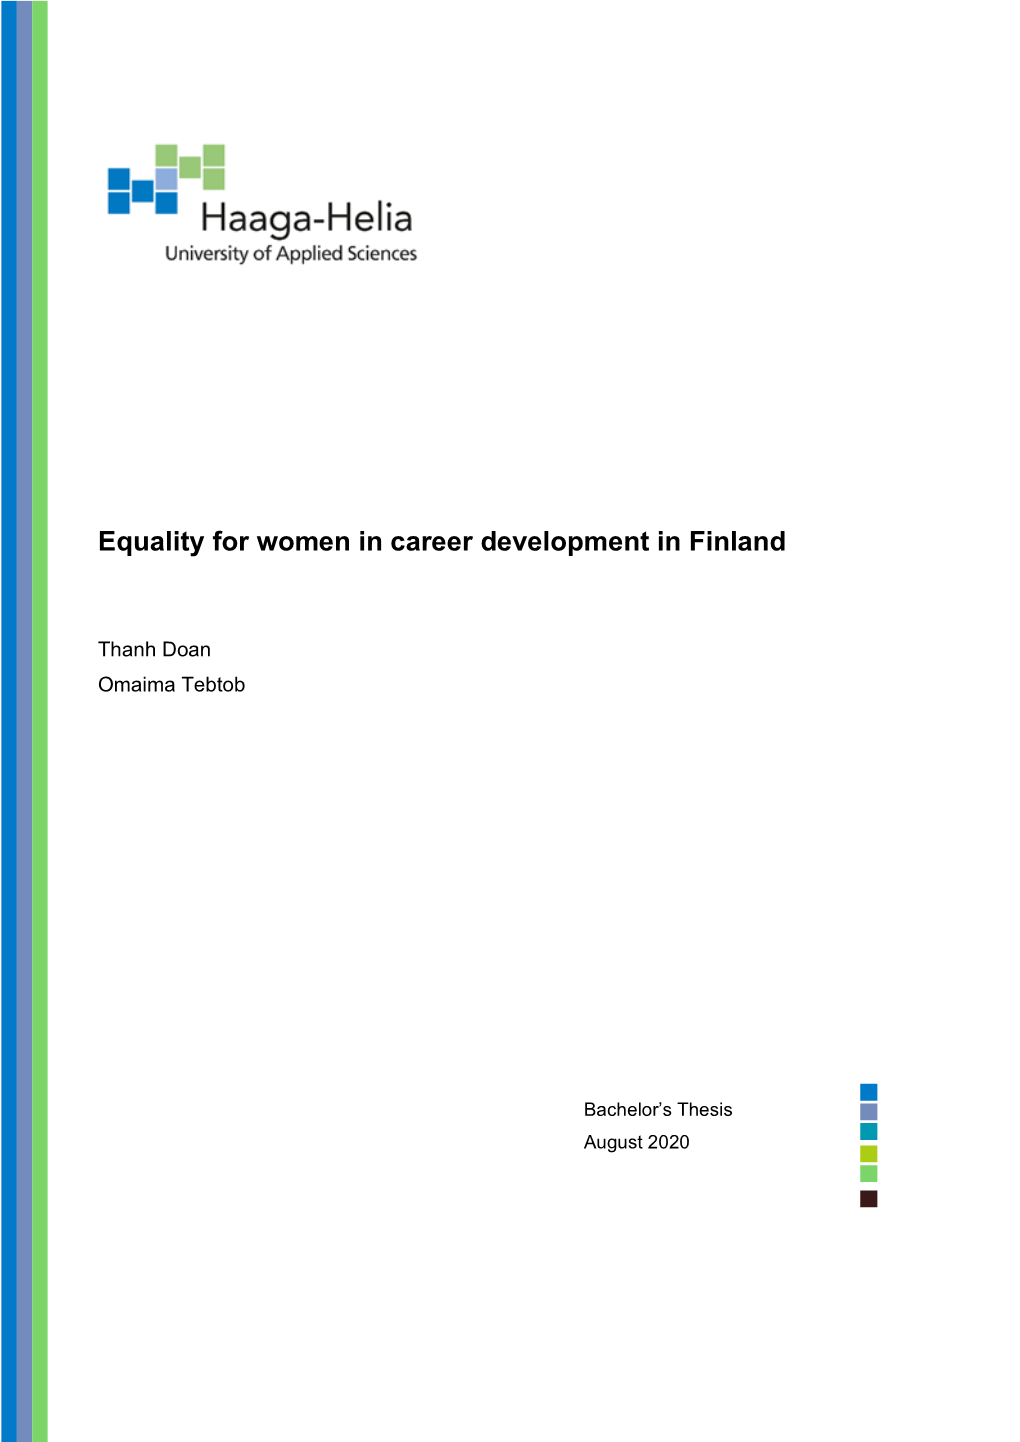 Equality for Women in Career Development in Finland